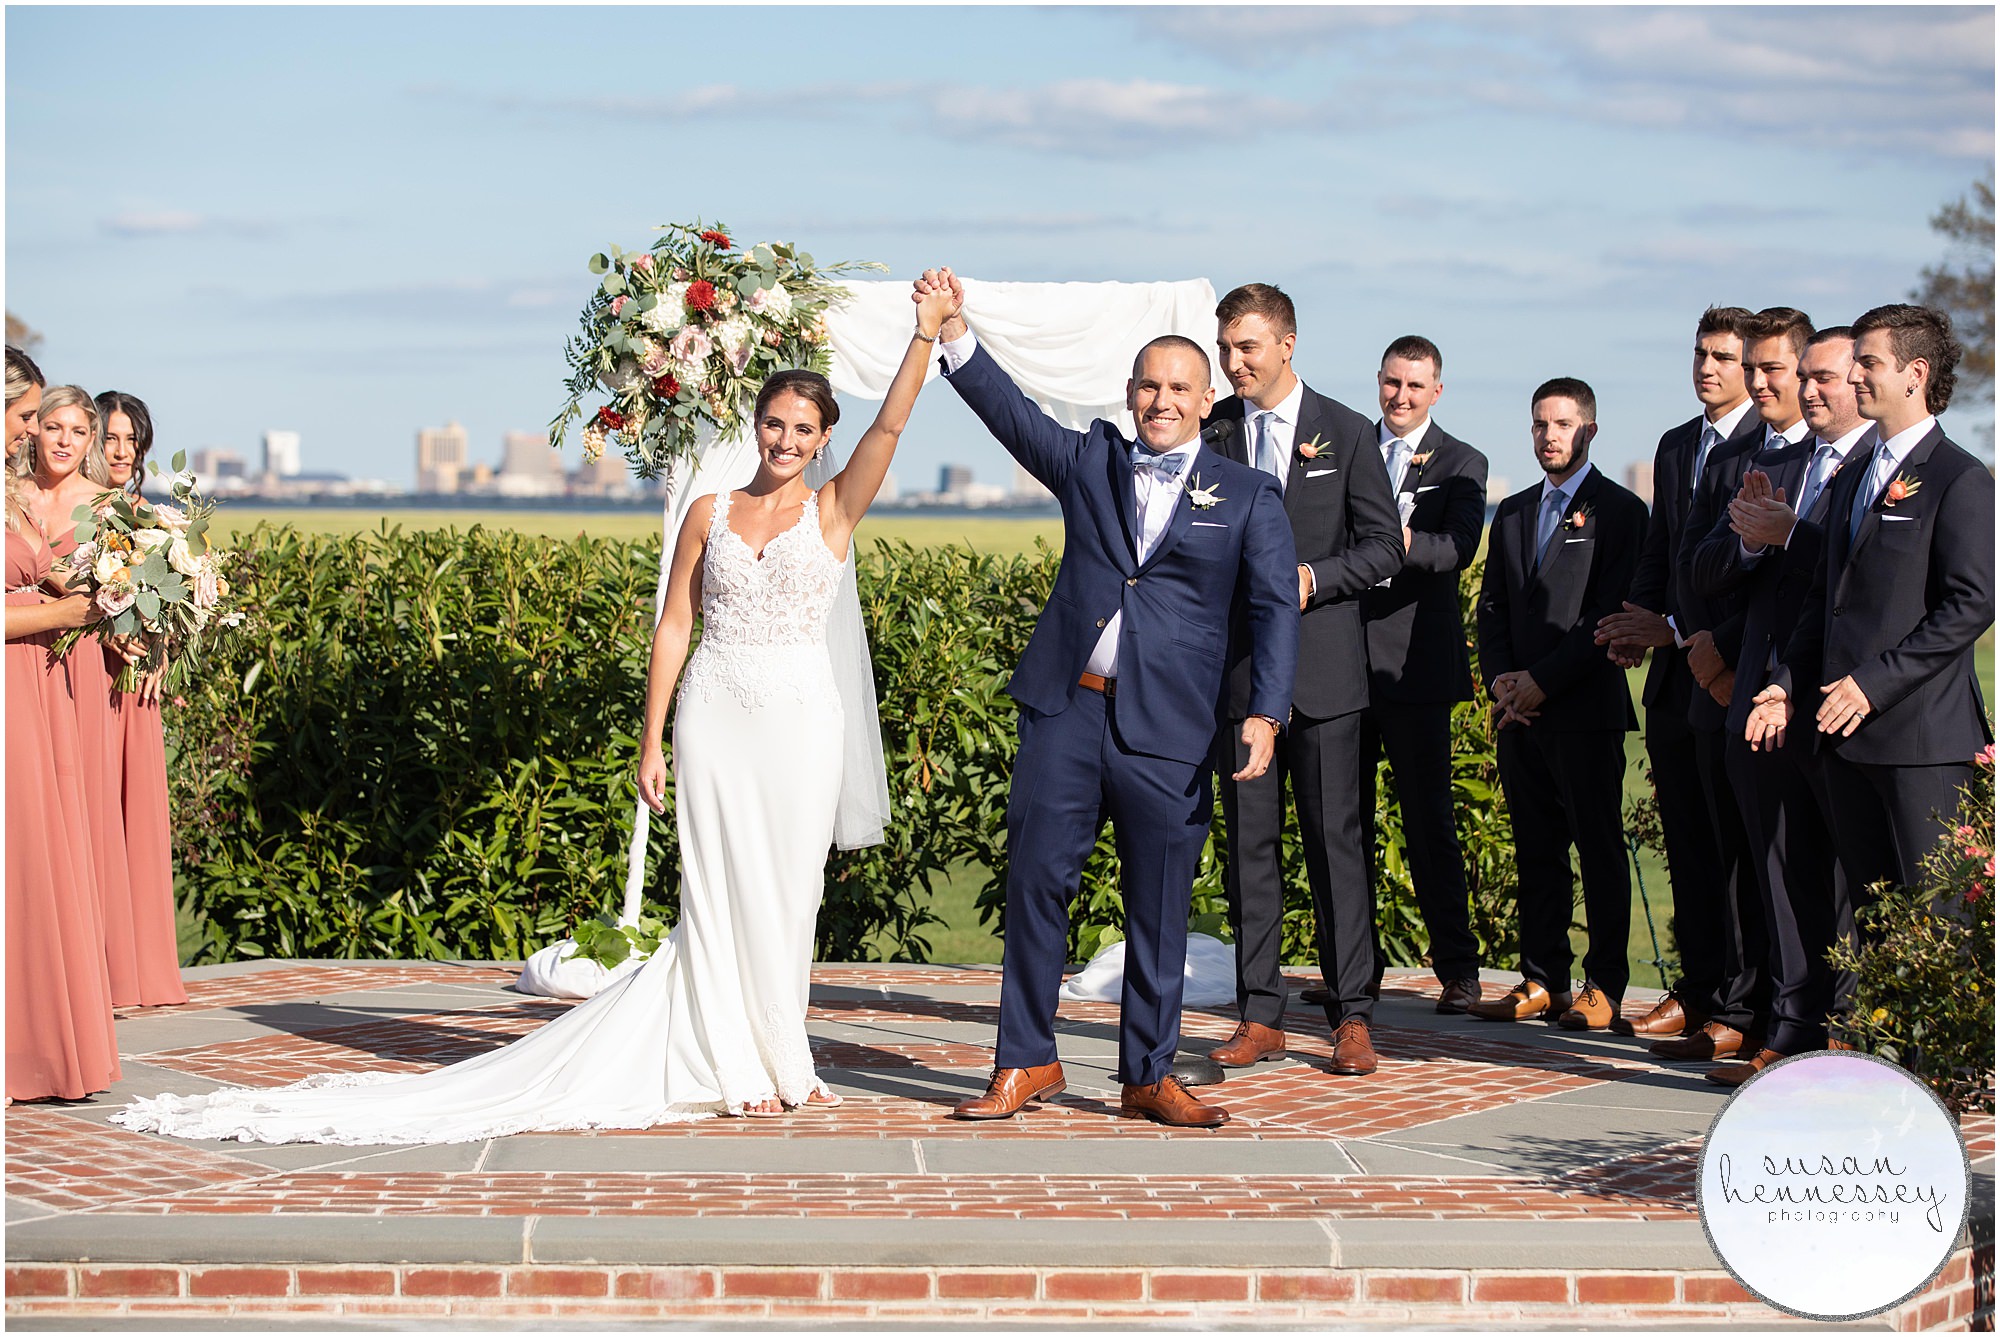 Outdoor ceremony at Atlantic City Country Club